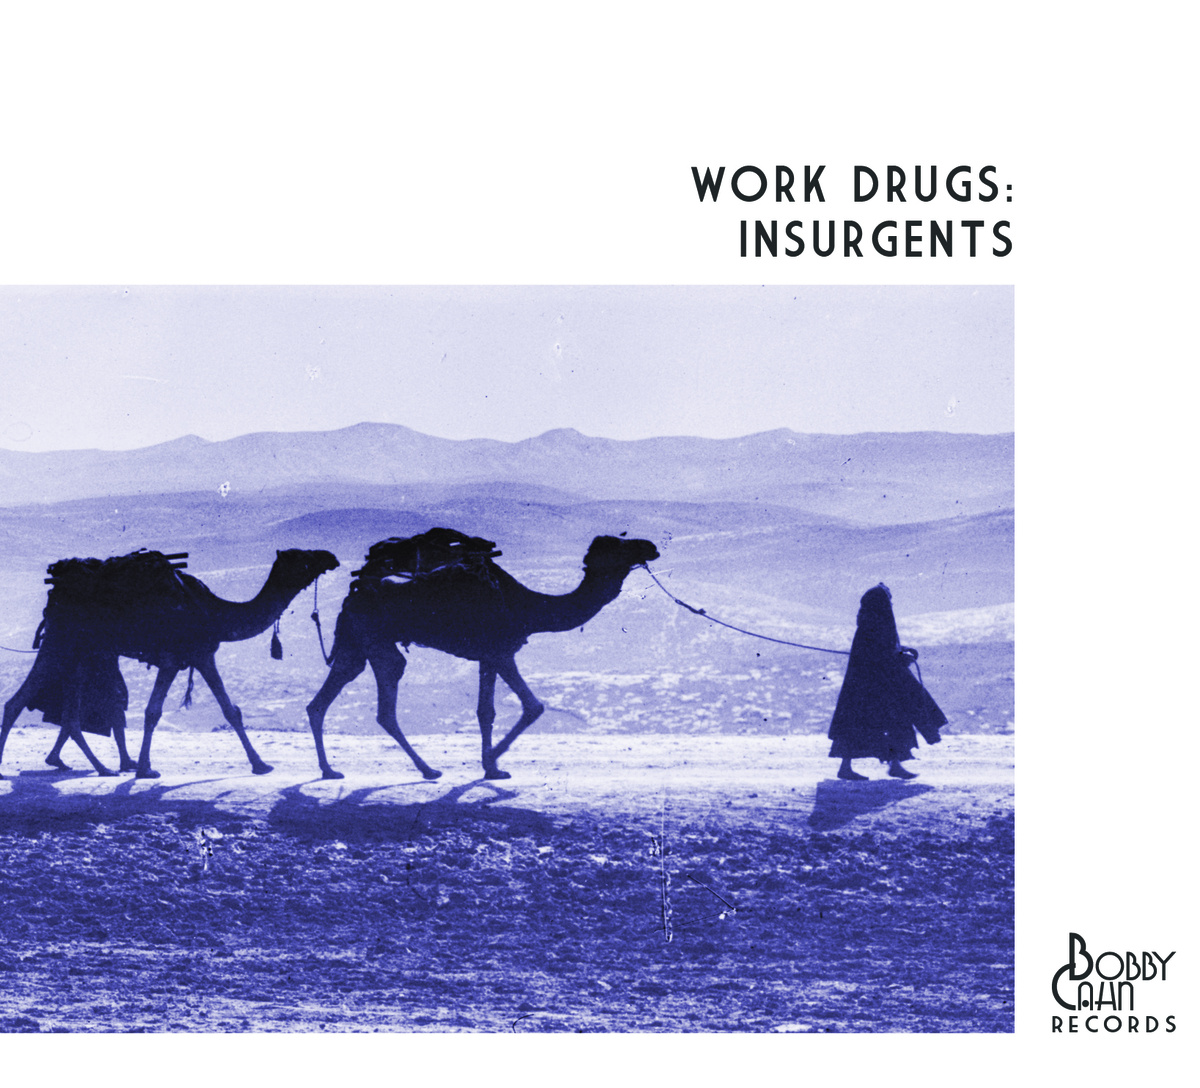 News Added Nov 11, 2013 Work Drugs will release a new album called "Insurgents" on March 4th. The first single is called "Chemical Burns". Submitted By Luis Henrique Track list: Added Nov 11, 2013 1. Insurgents 2. Time 03:20 3. Heaven or Farewell 4. Half Love 5. The Good in Goodbye 6. Chemical Burns 7. […]